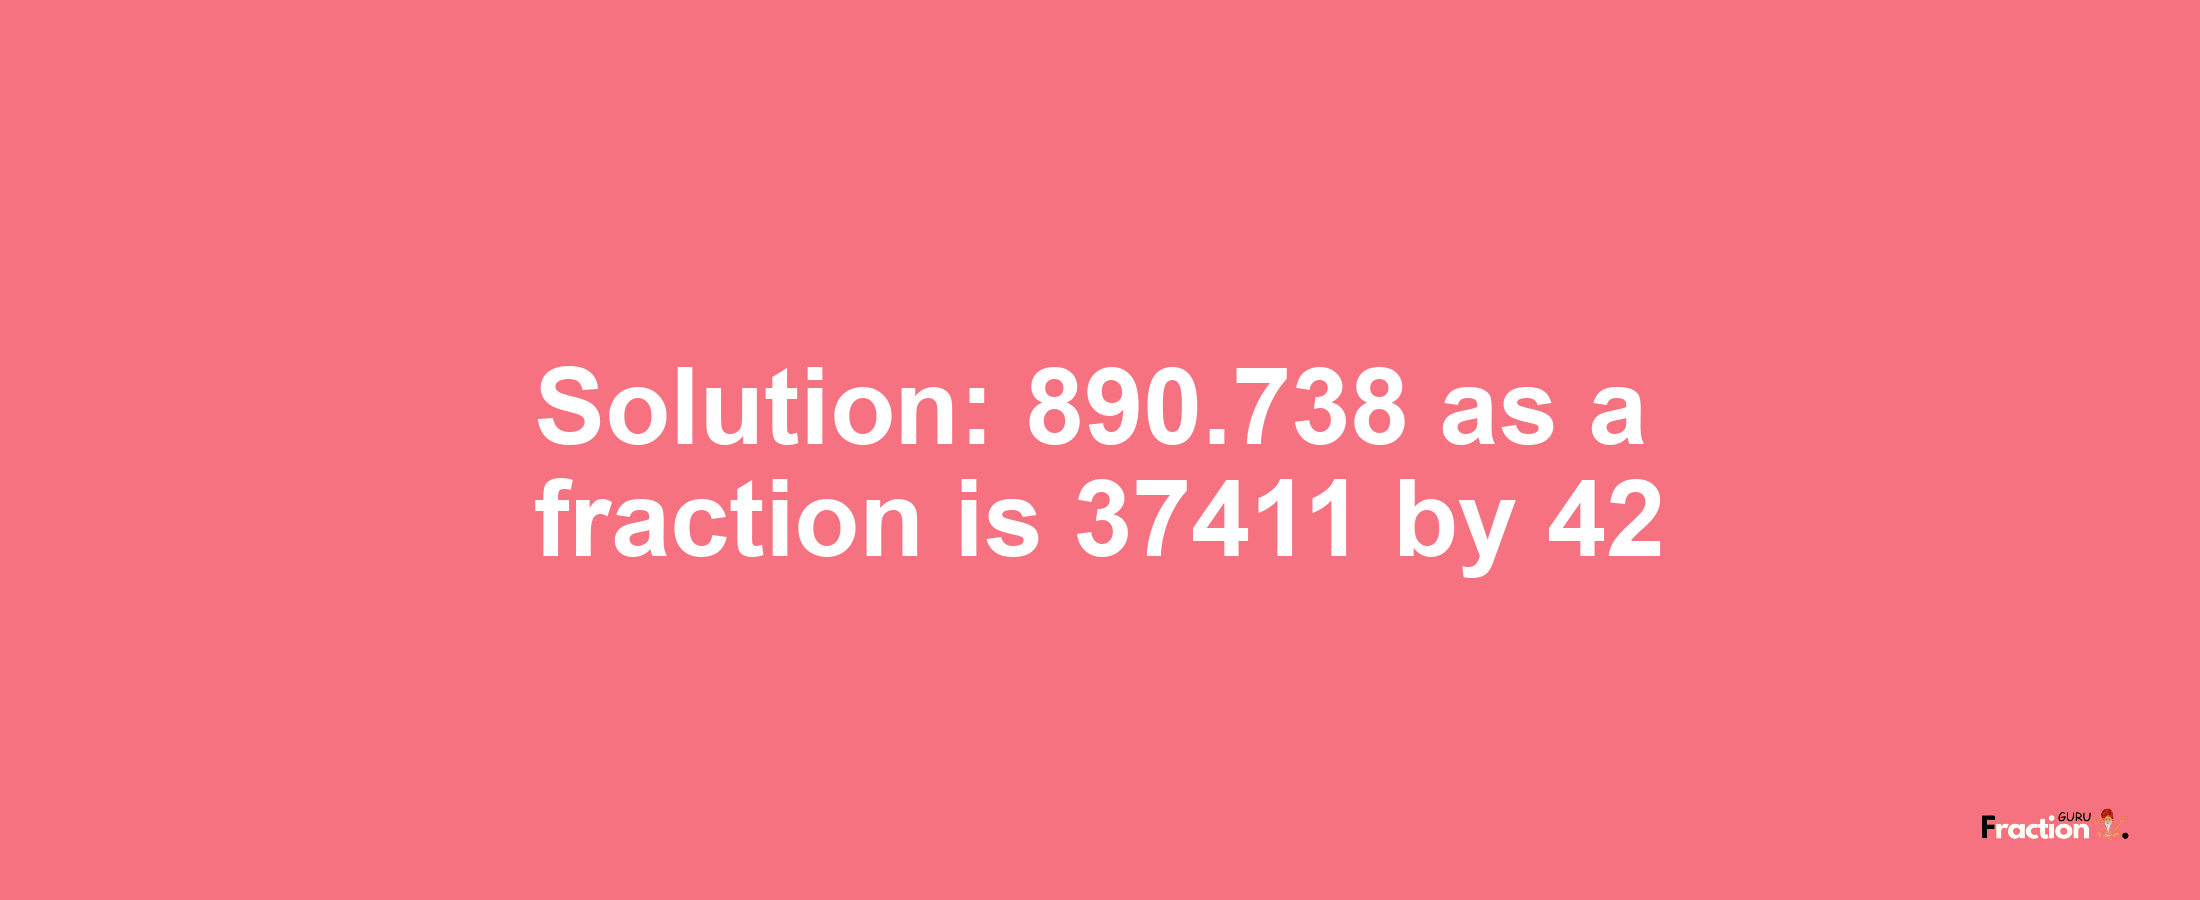 Solution:890.738 as a fraction is 37411/42